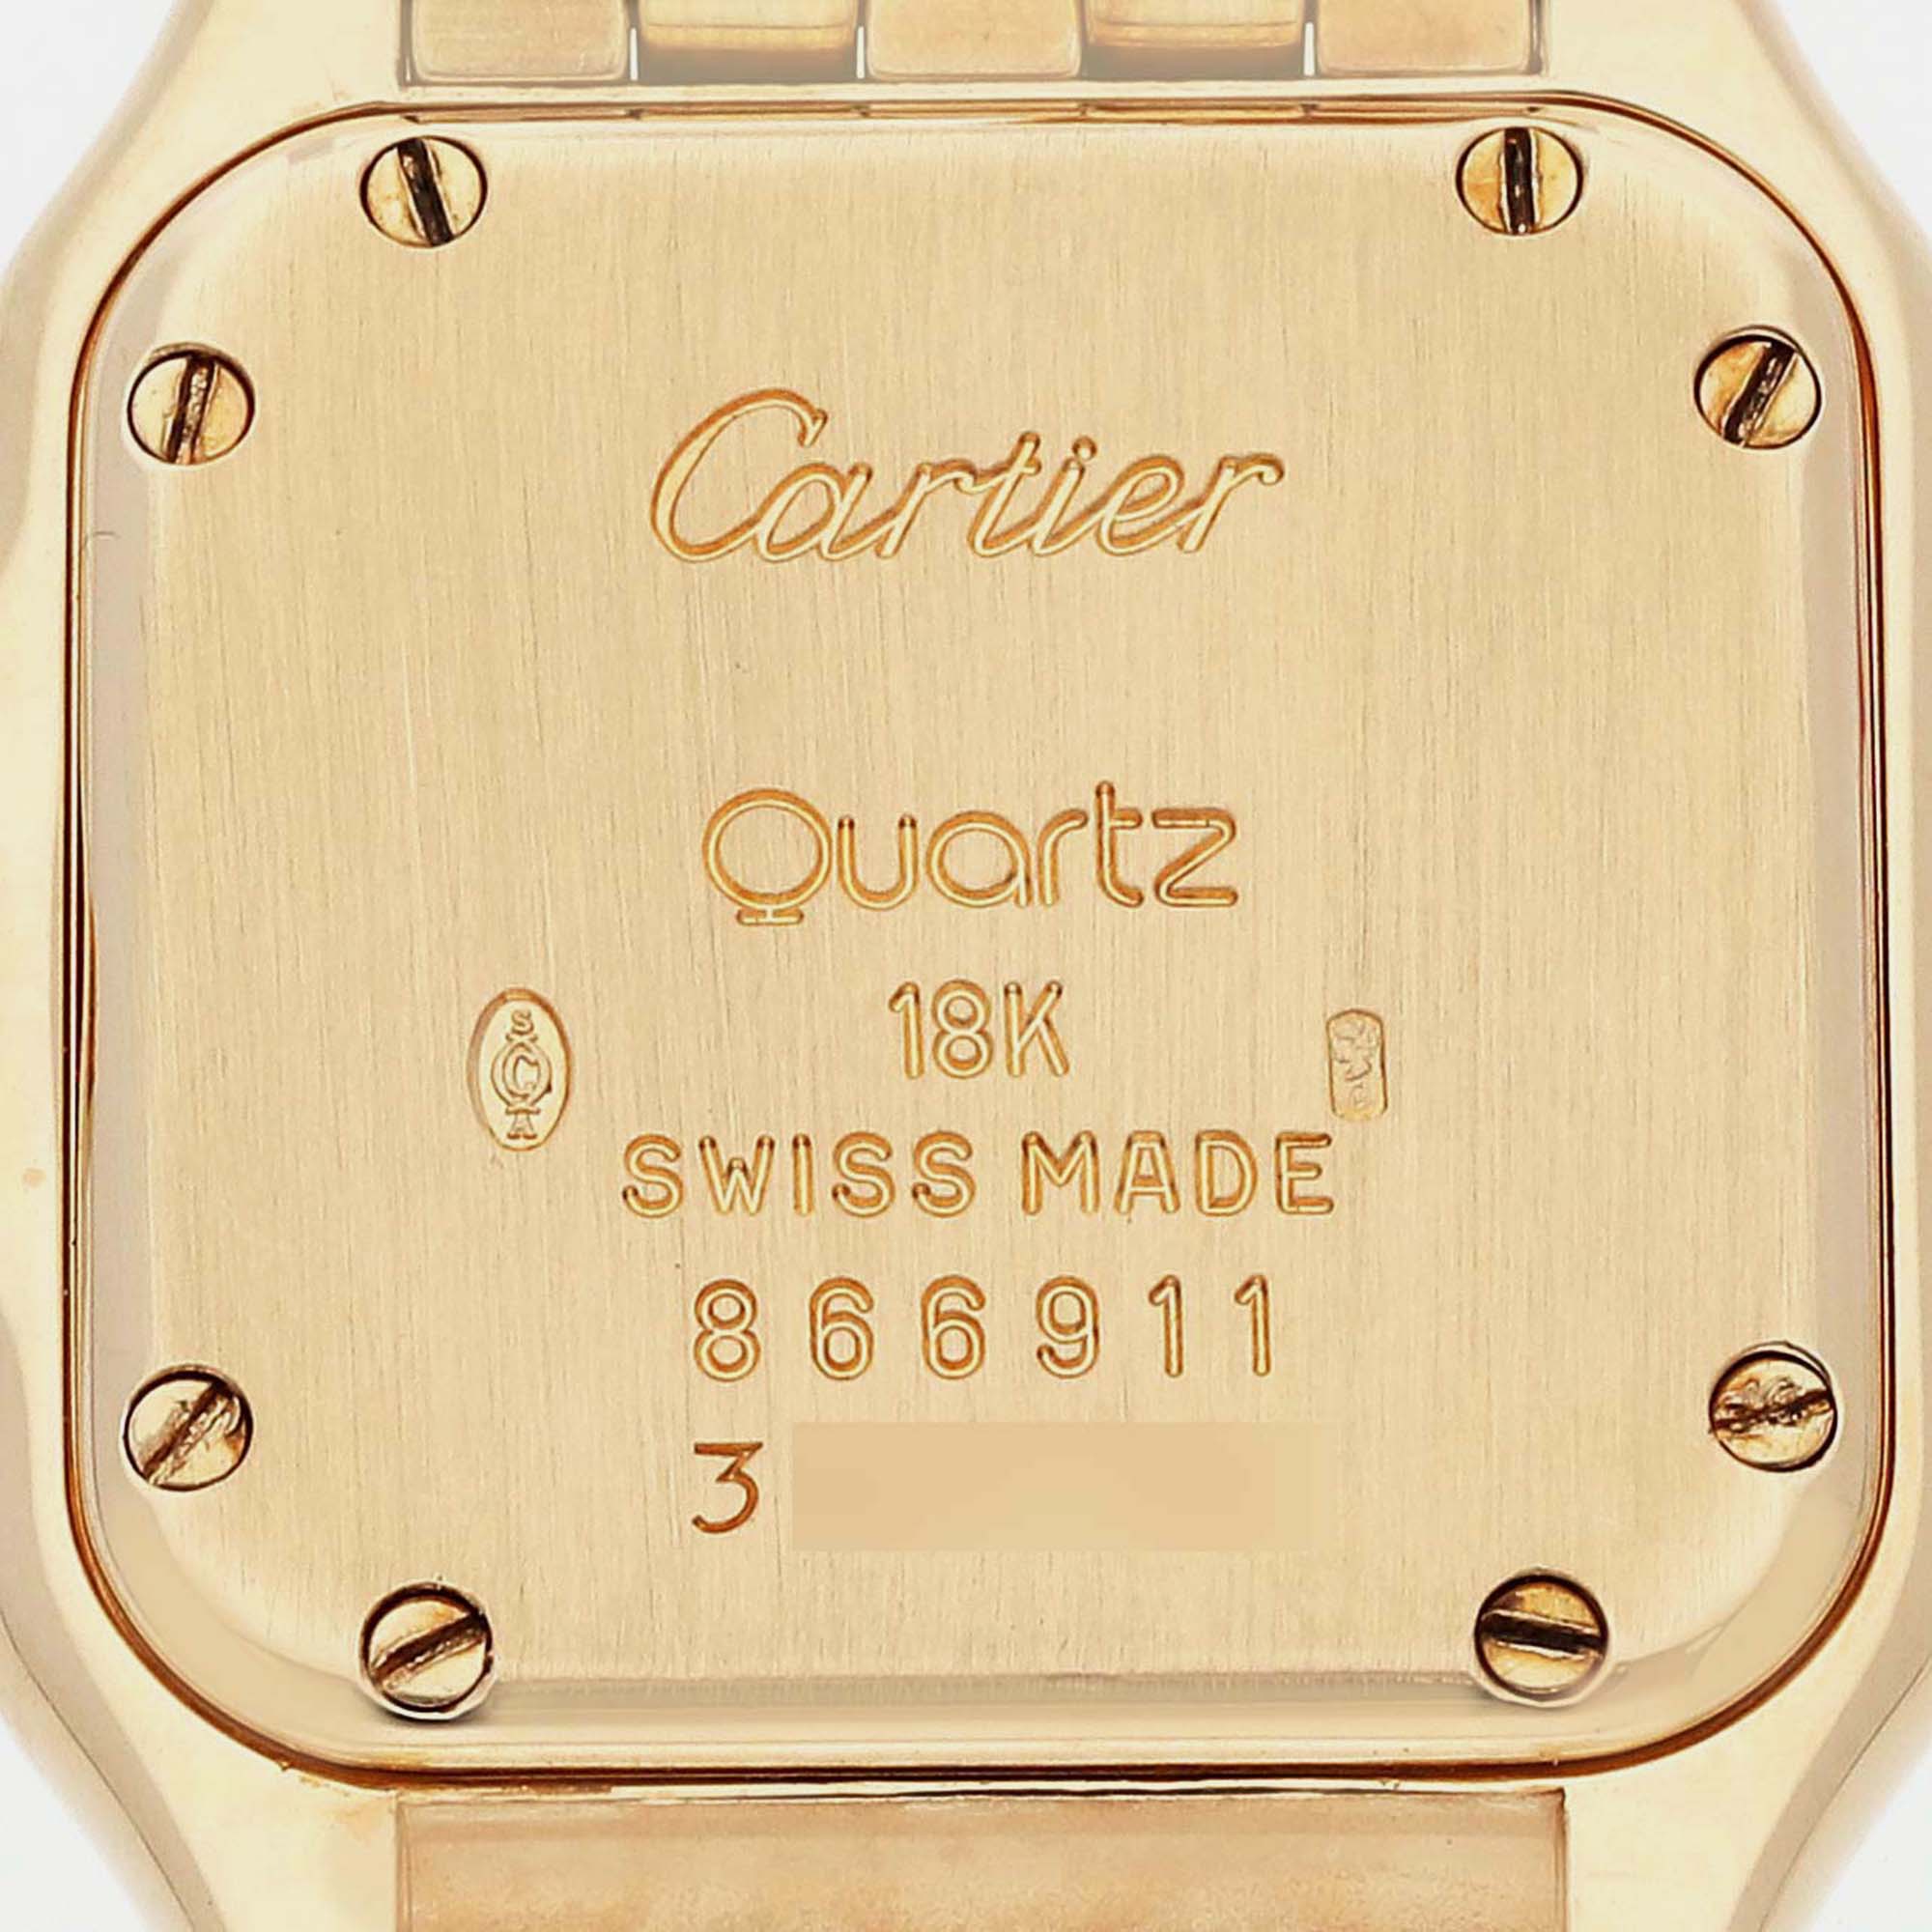 Cartier Panthere Small Yellow Gold Silver Dial Ladies Watch W25022B9 22.0 Mm X 28.0 Mm